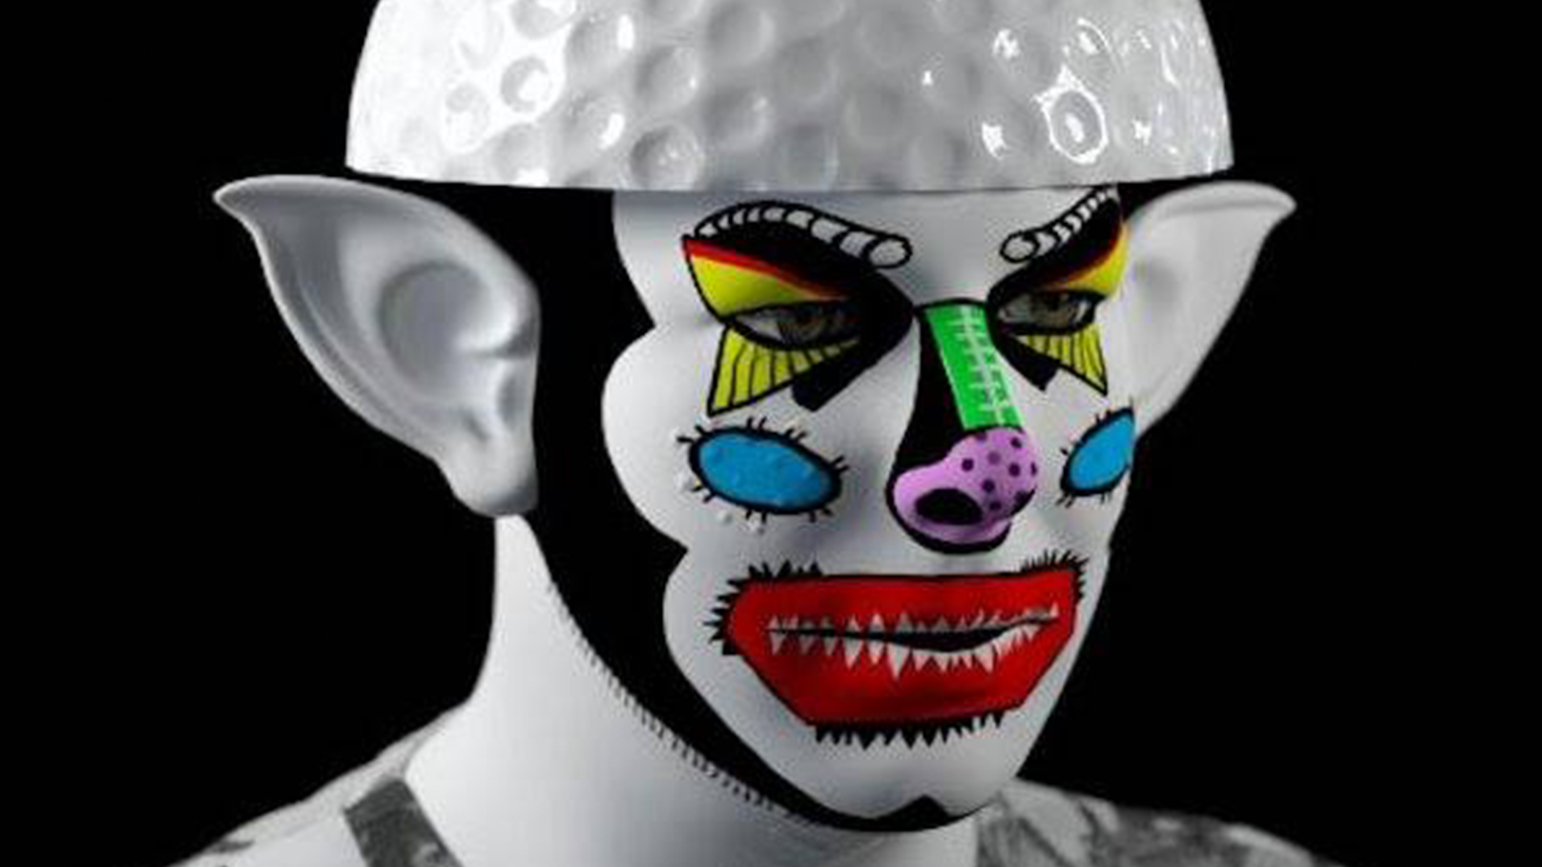 Digital image of a person with garish clown makeup